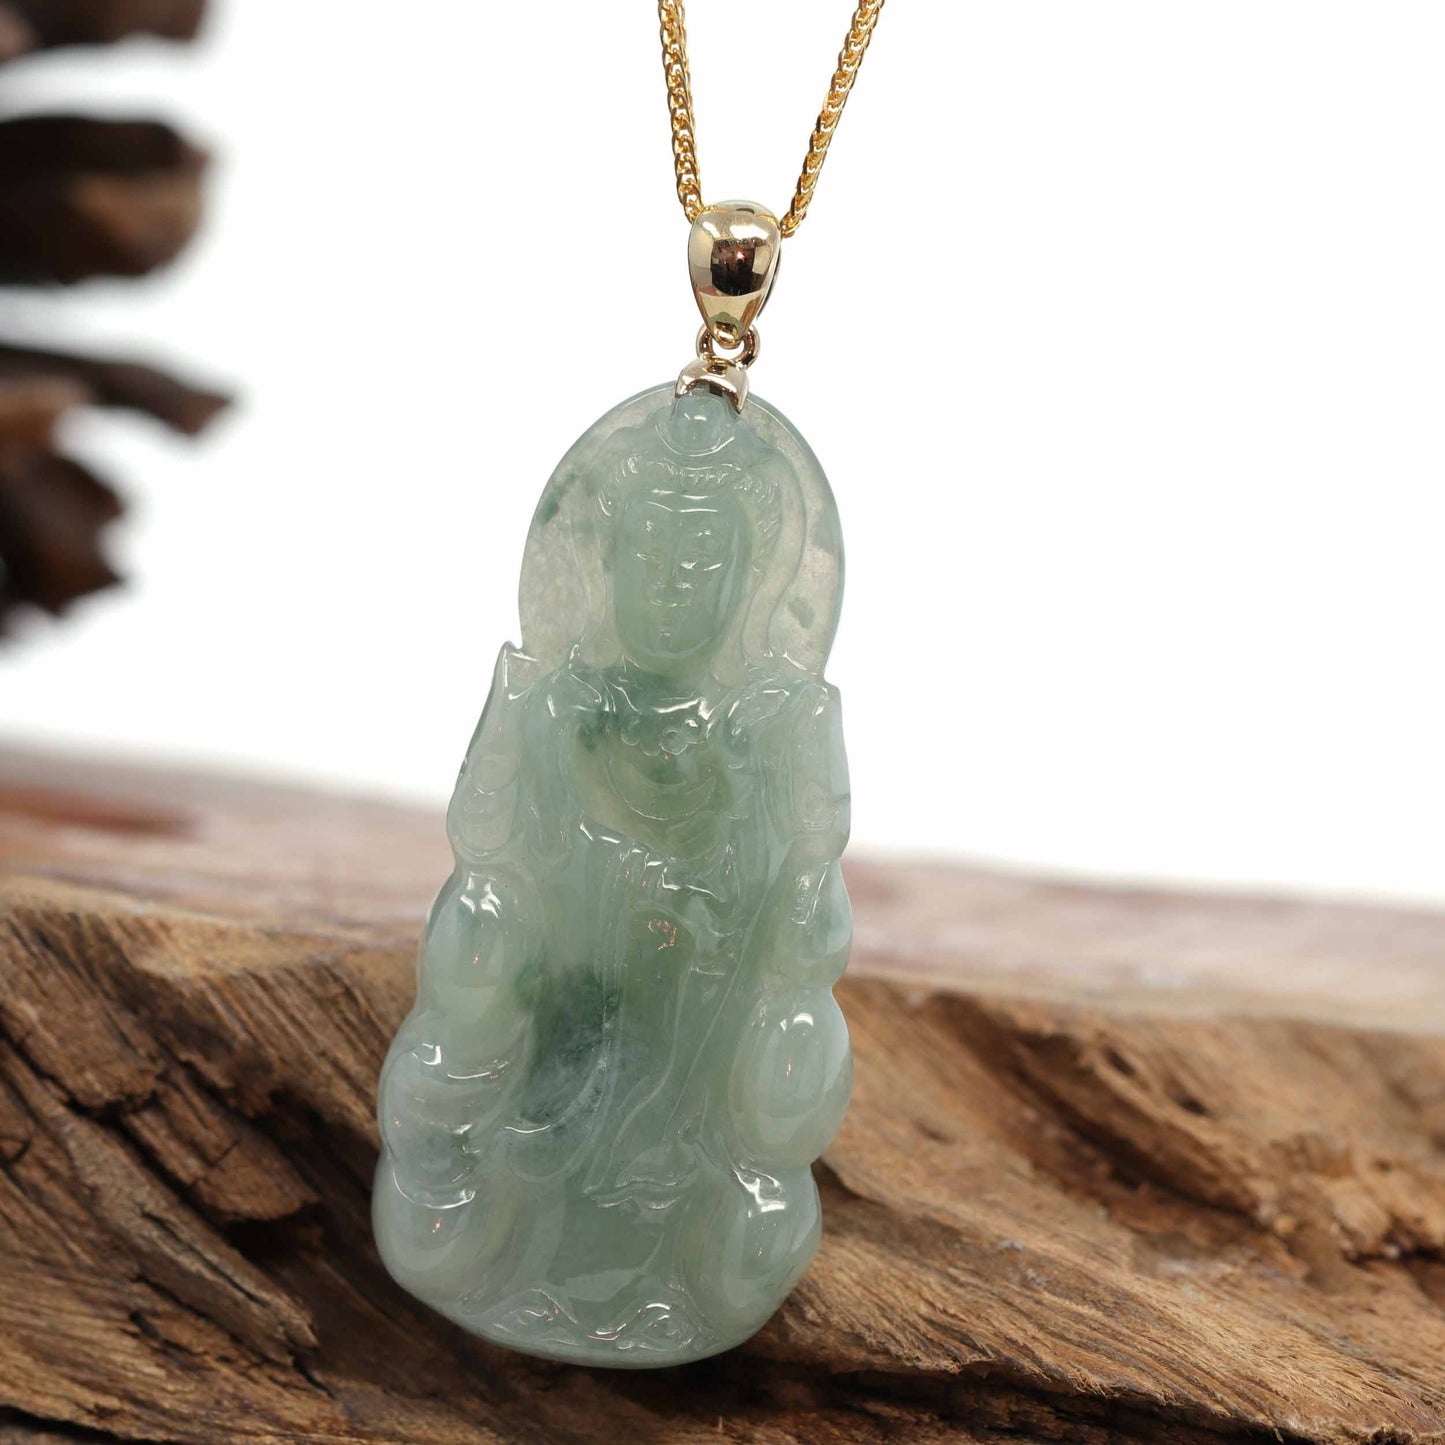 RealJade 14k White Gold "Goddess of Compassion" Genuine Ice Blue Green Burmese Jadeite Jade Guanyin Necklace With Good Luck Design